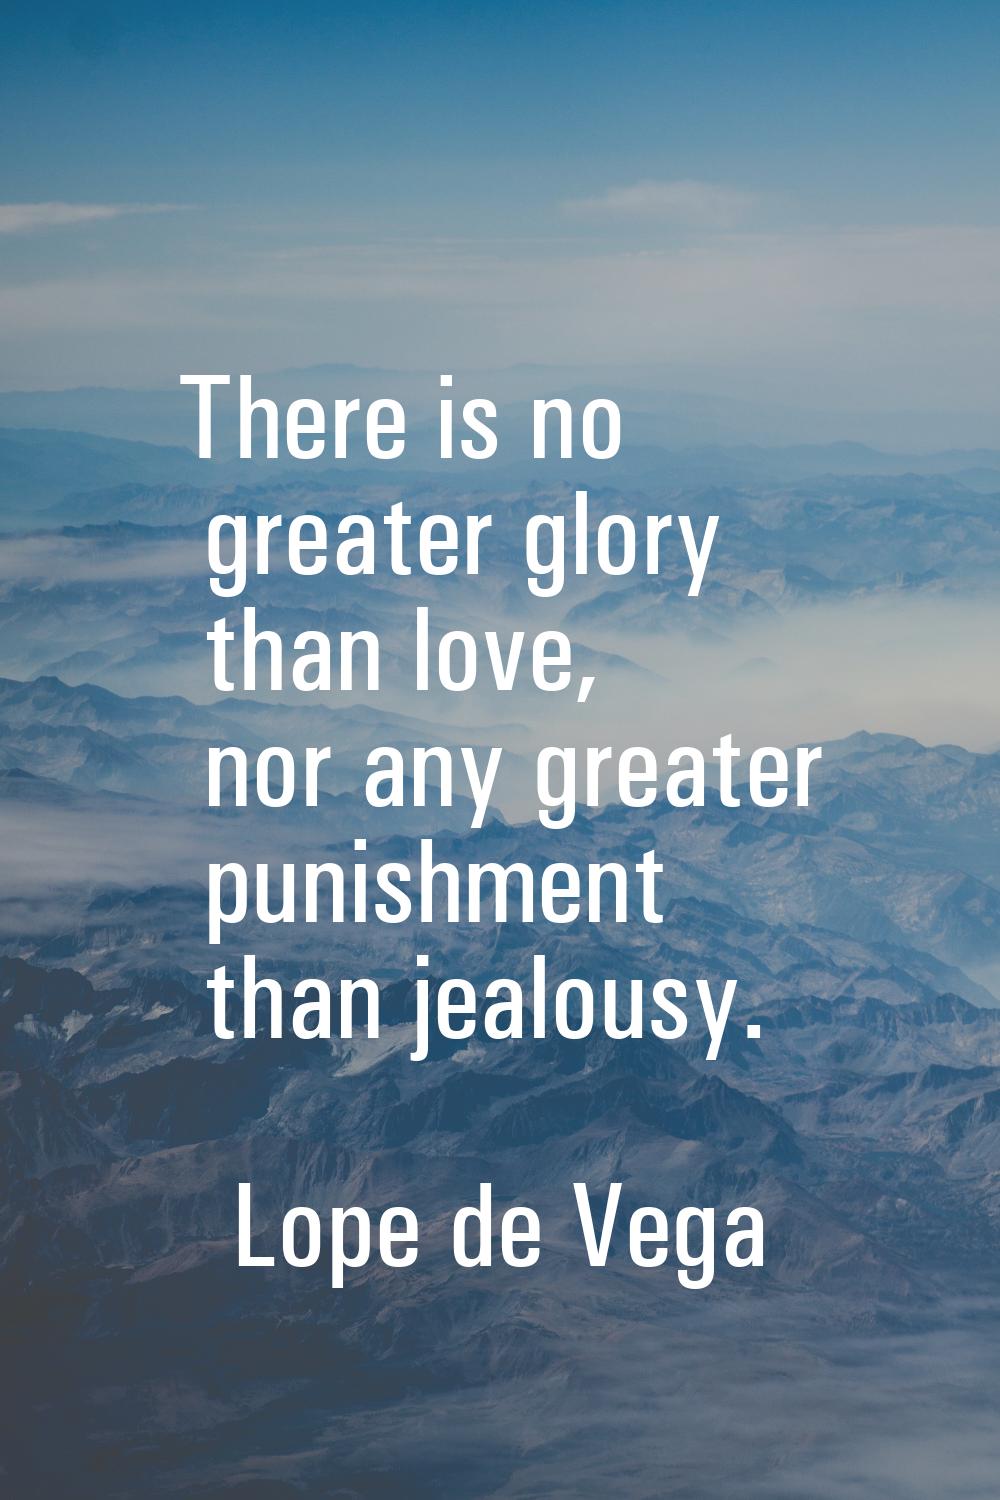 There is no greater glory than love, nor any greater punishment than jealousy.